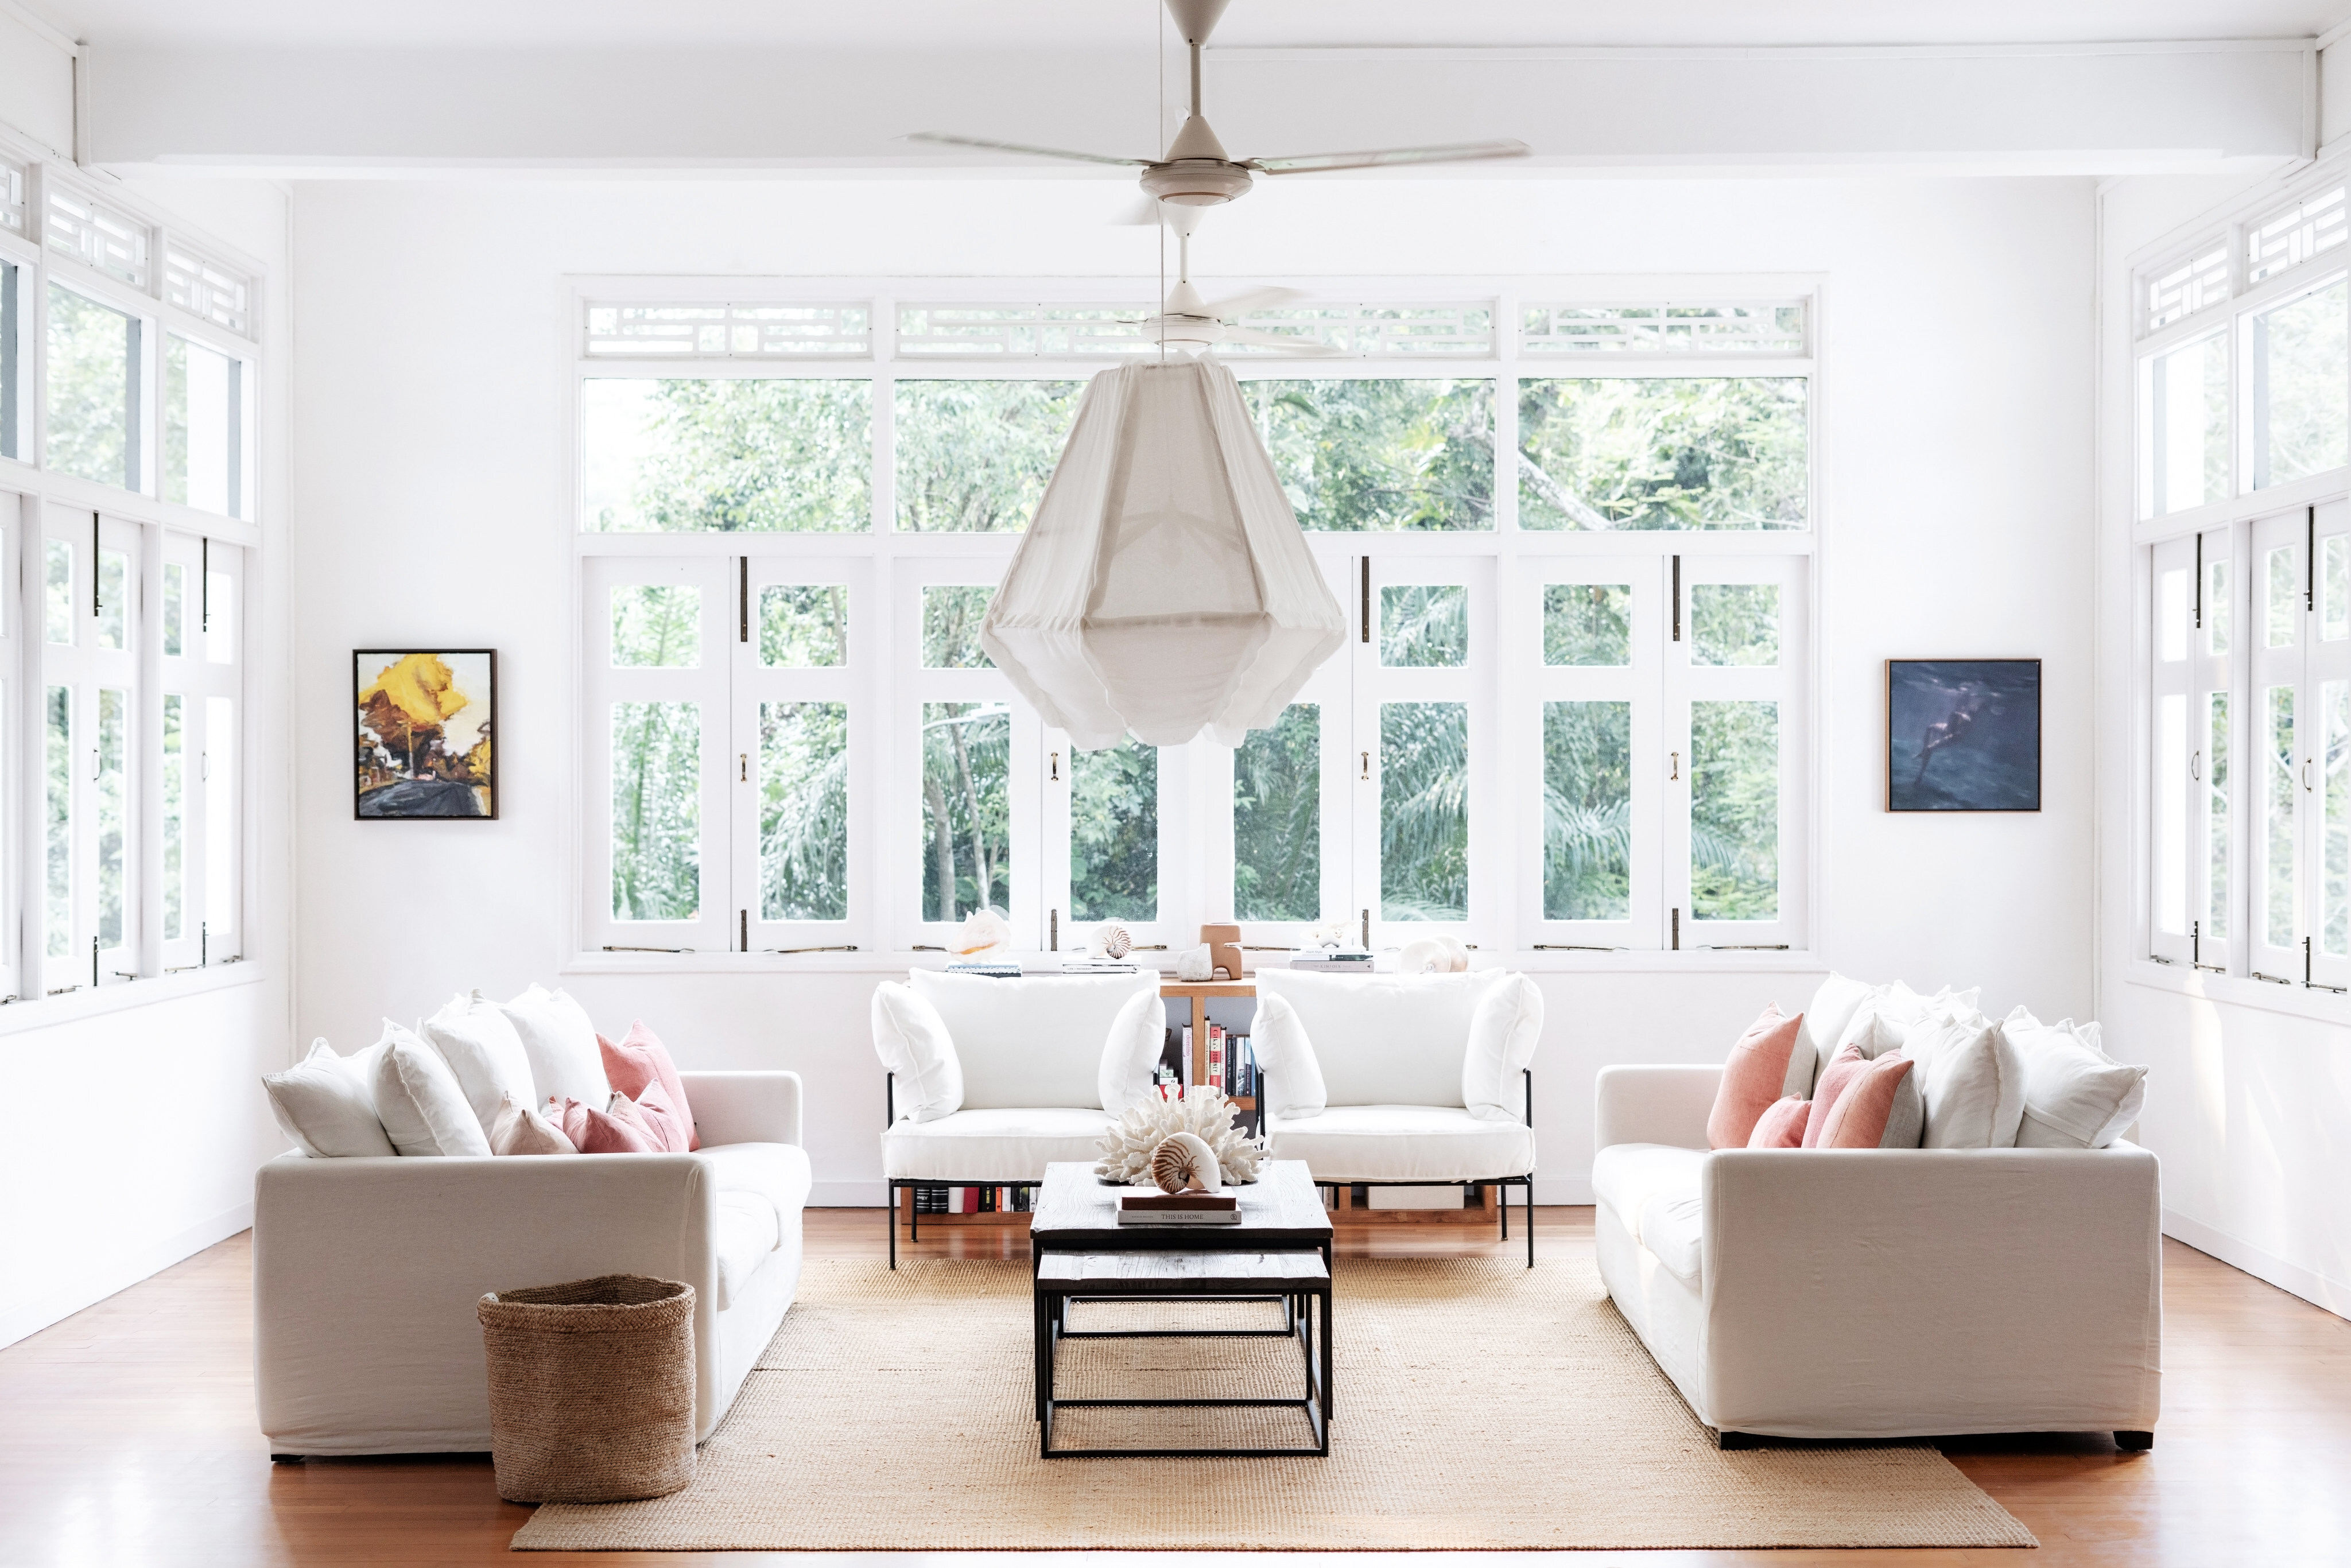 Charlie Cameron took a bare-bones approach when it came to decorating her family’s 6,700 sq ft black-and-white rental home in Singapore. Photo: Charlie Cameron